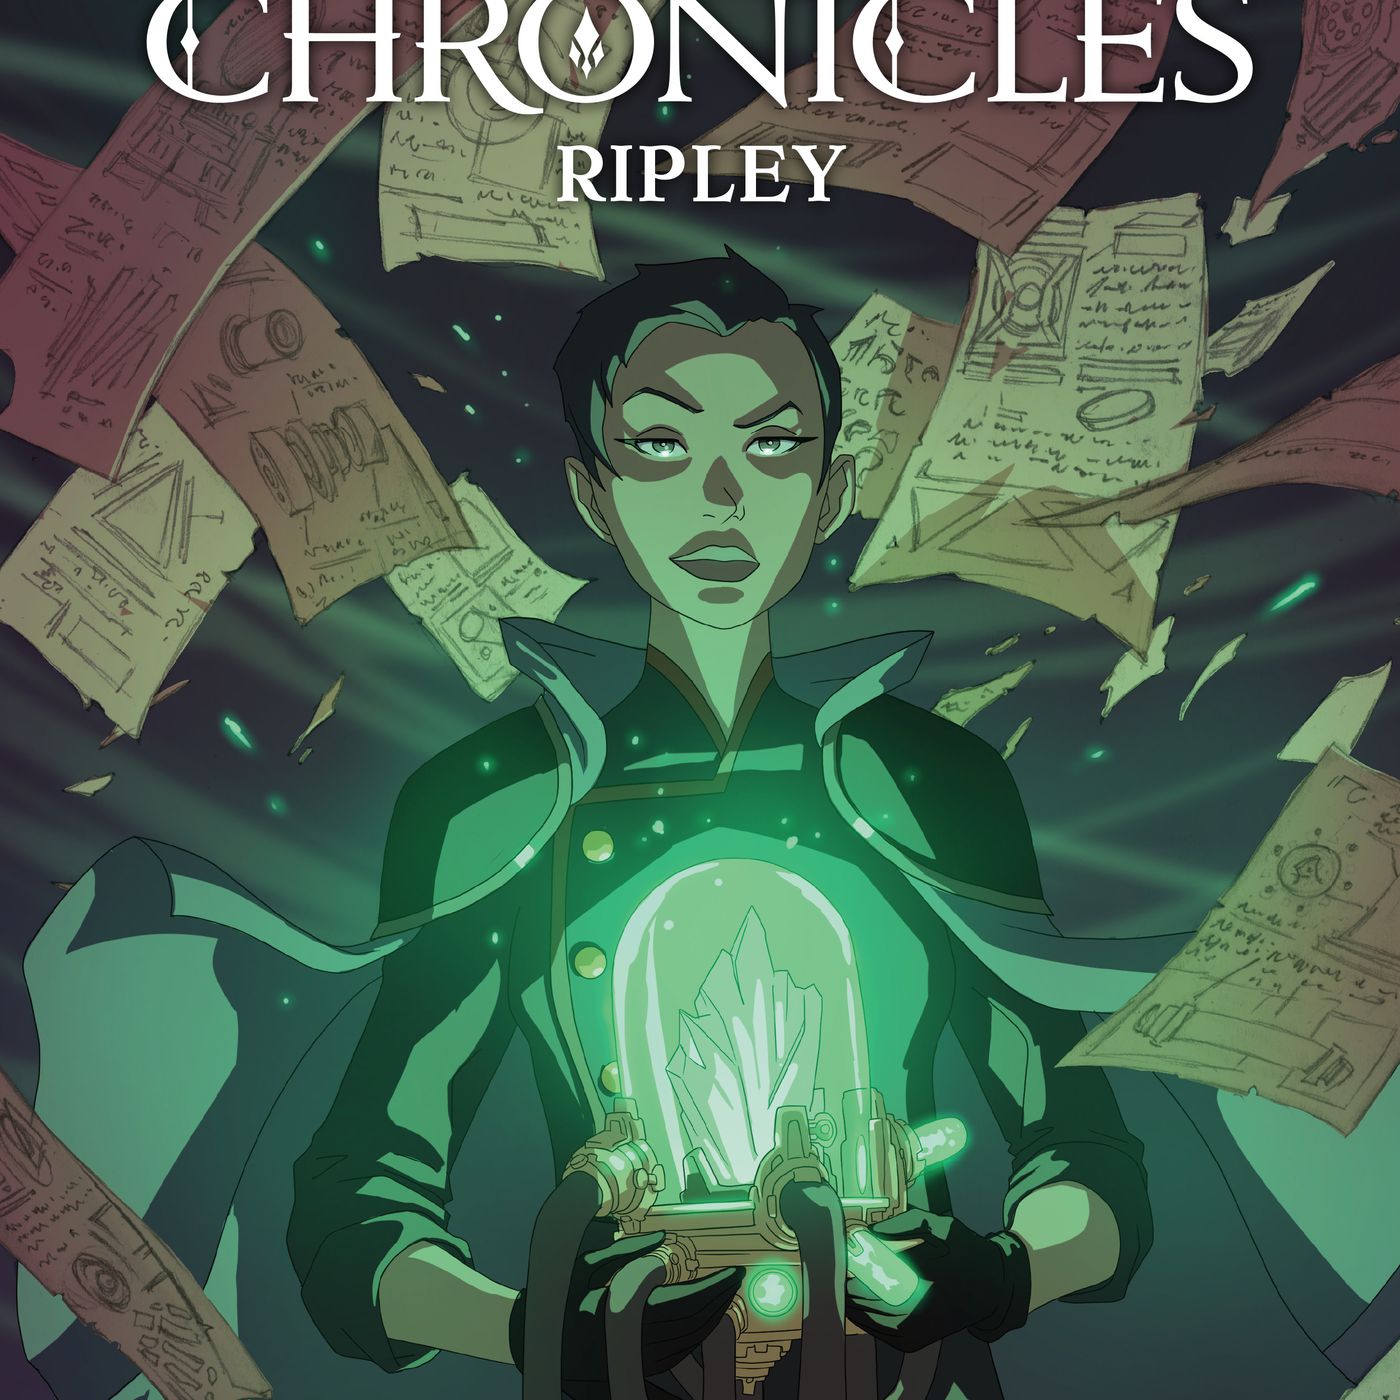 New Critical Role graphic novel explores Dr. Ripley's rise to